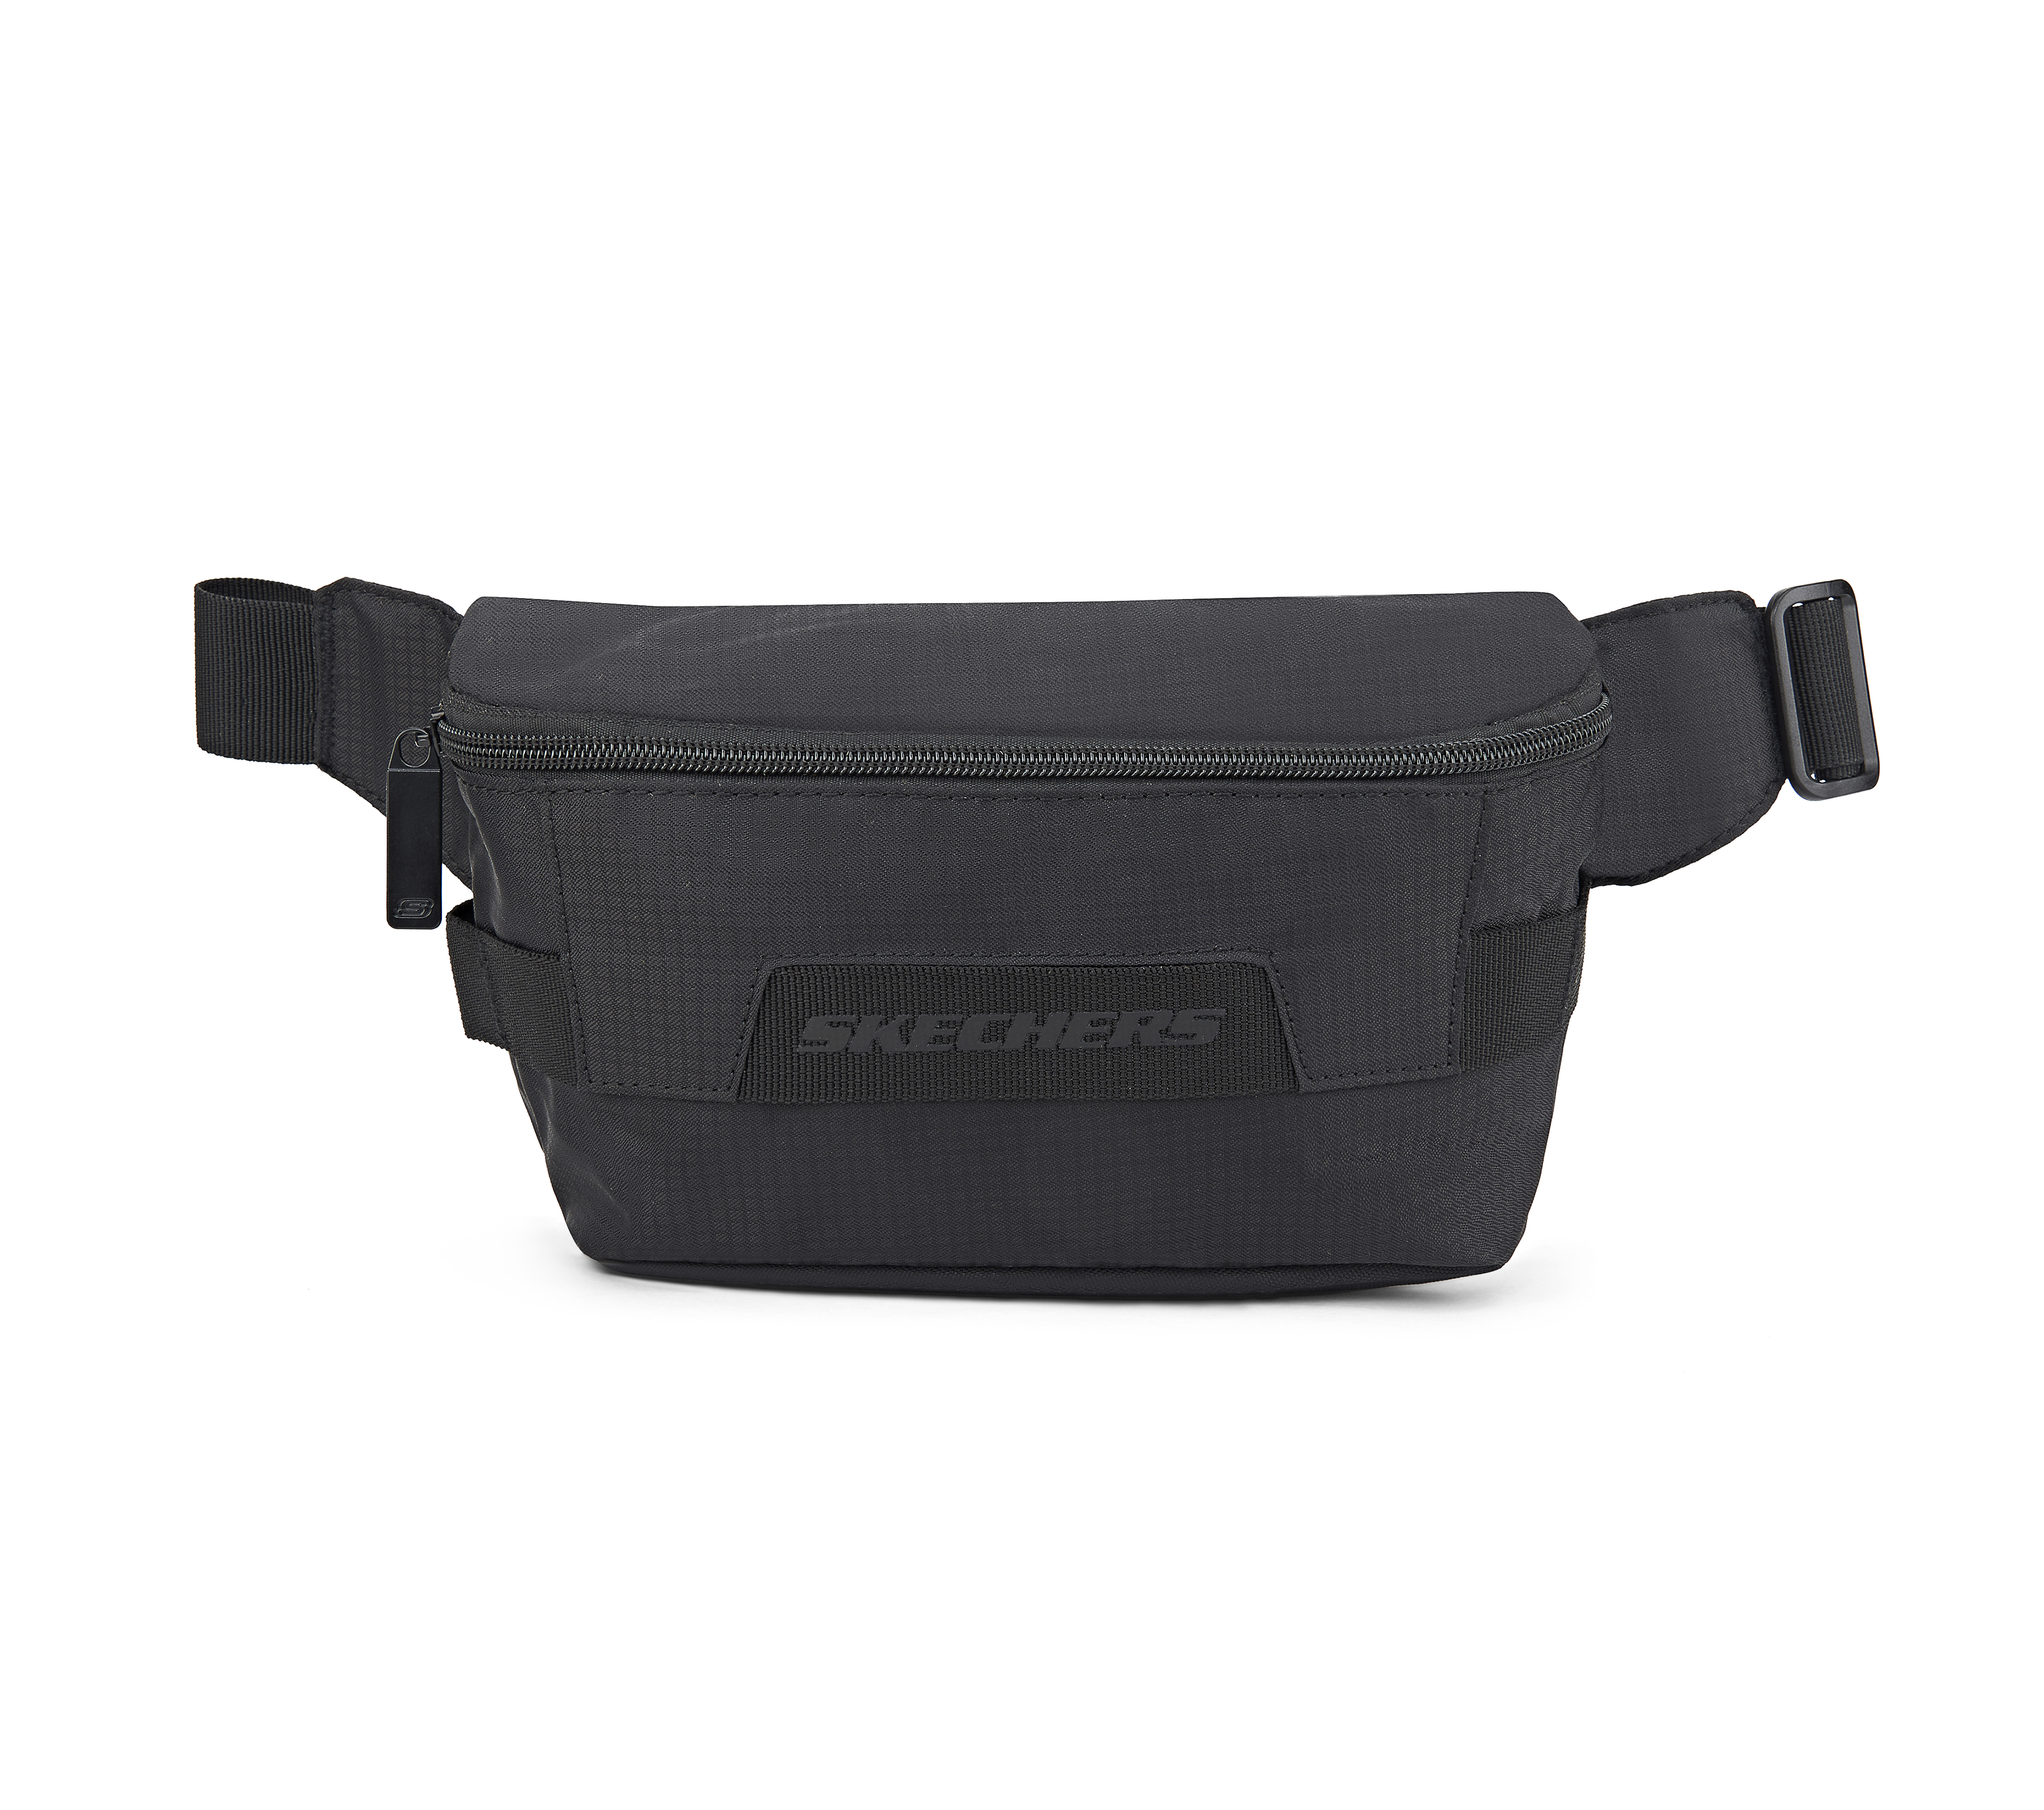 WAIST BAG, BBBBLACK Accessories Lateral View